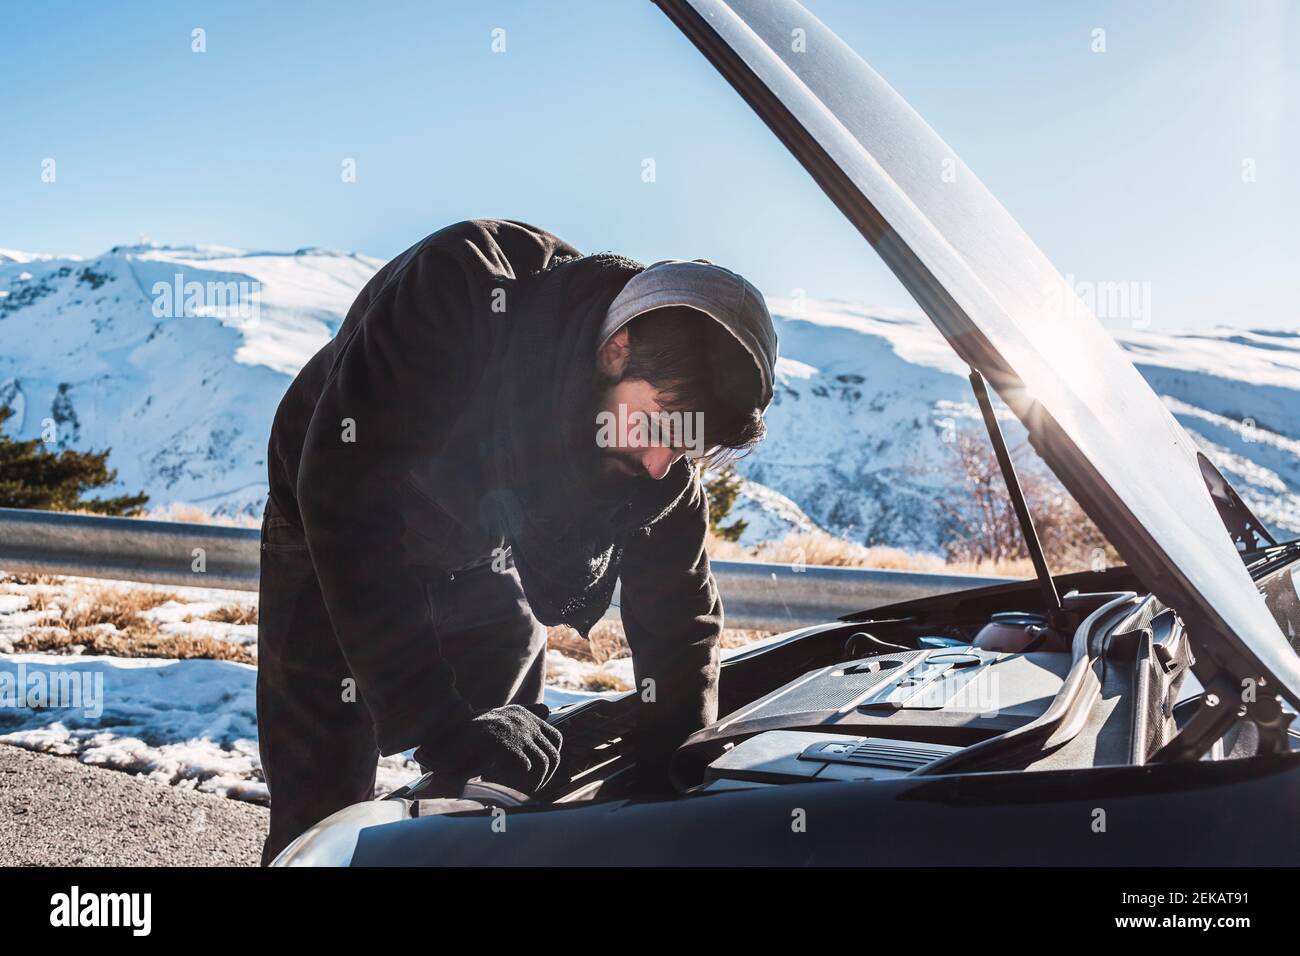 Man repairing car on snow covered land against sky during winter Stock Photo